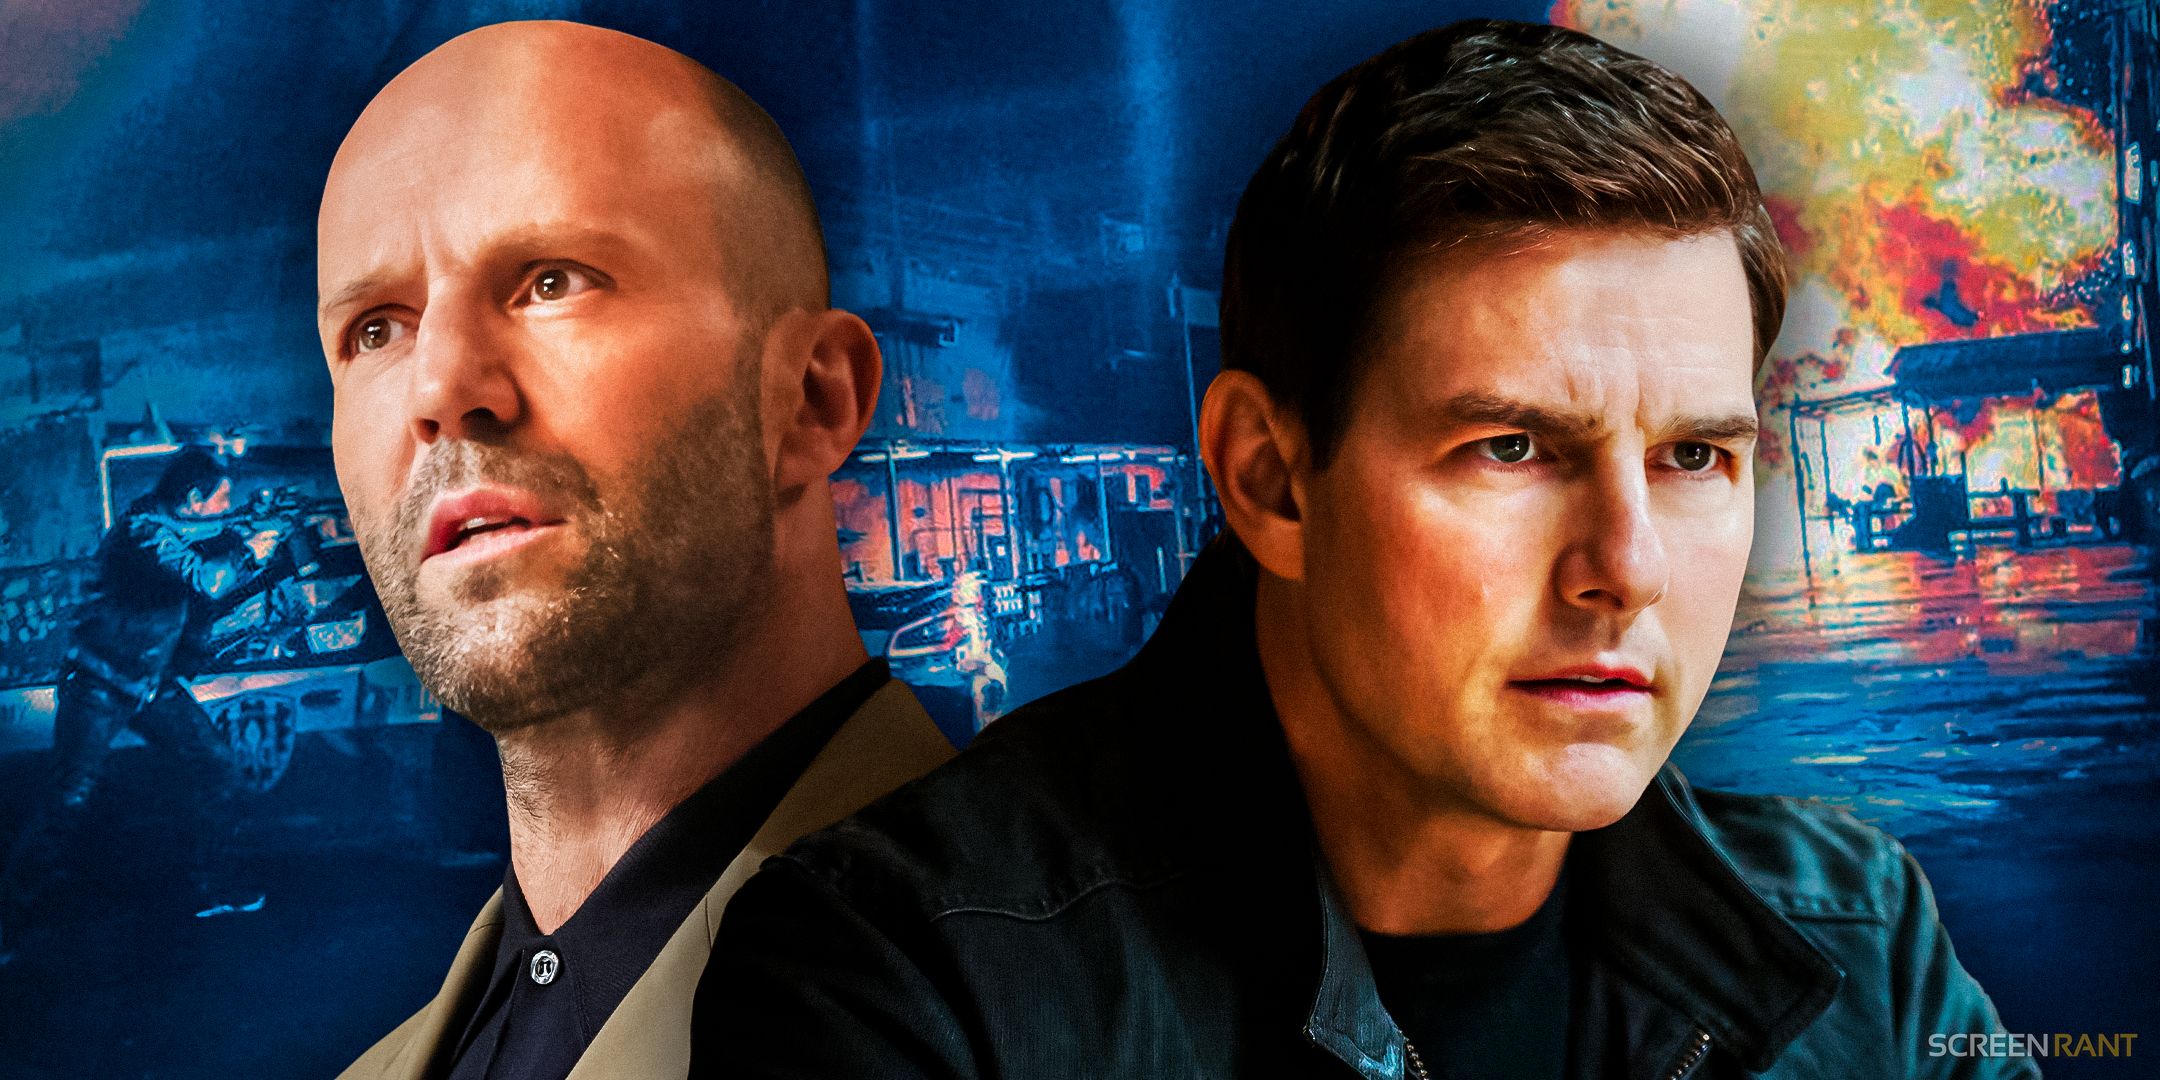 Jason Statham as Orson from Operation Fortune Ruse de Guerre and Tom Cruise as Jack Reacher from Never Go Back